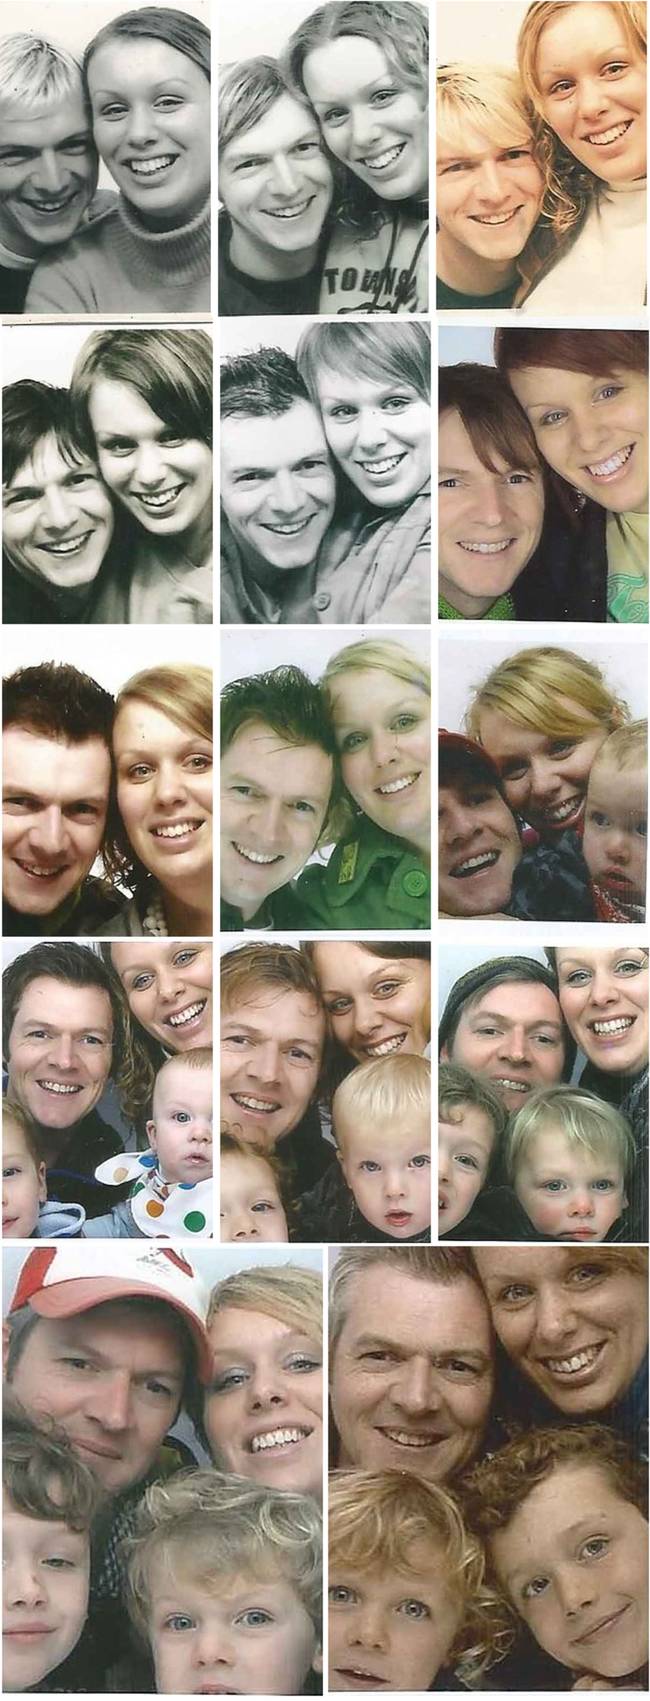 20. Giles and Michelle Paley-Phillips took a photo booth picture every year since 2000, when they started dating.